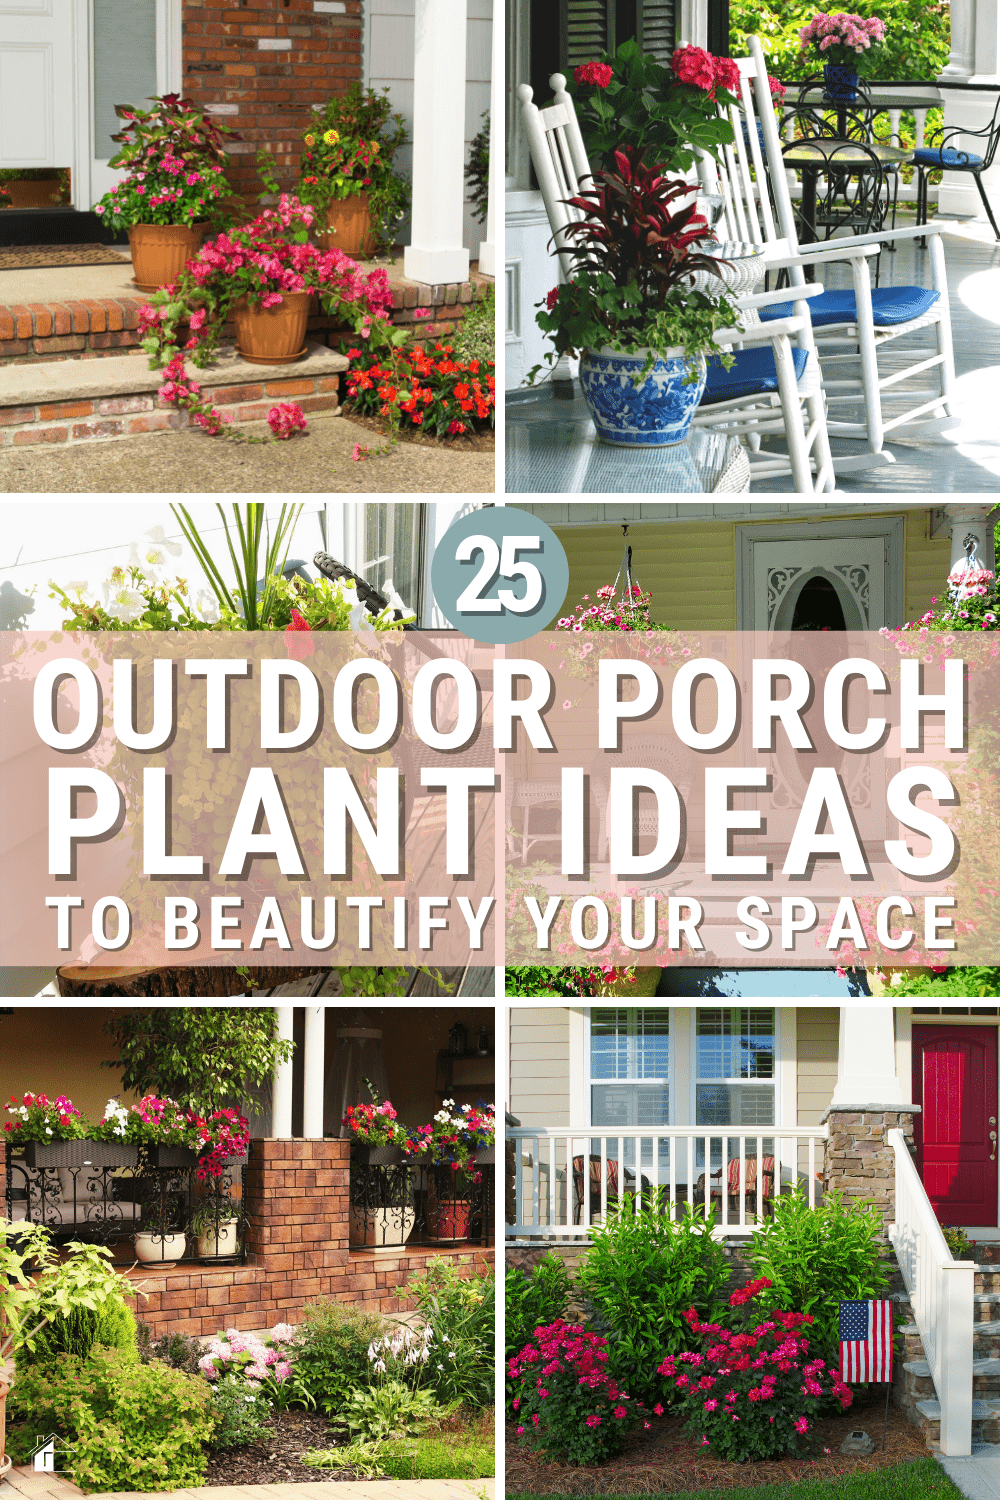 Want to add some life (and color) to your porch? Check out these 25 outdoor porch plant ideas that will beautify your space! via @mystayathome